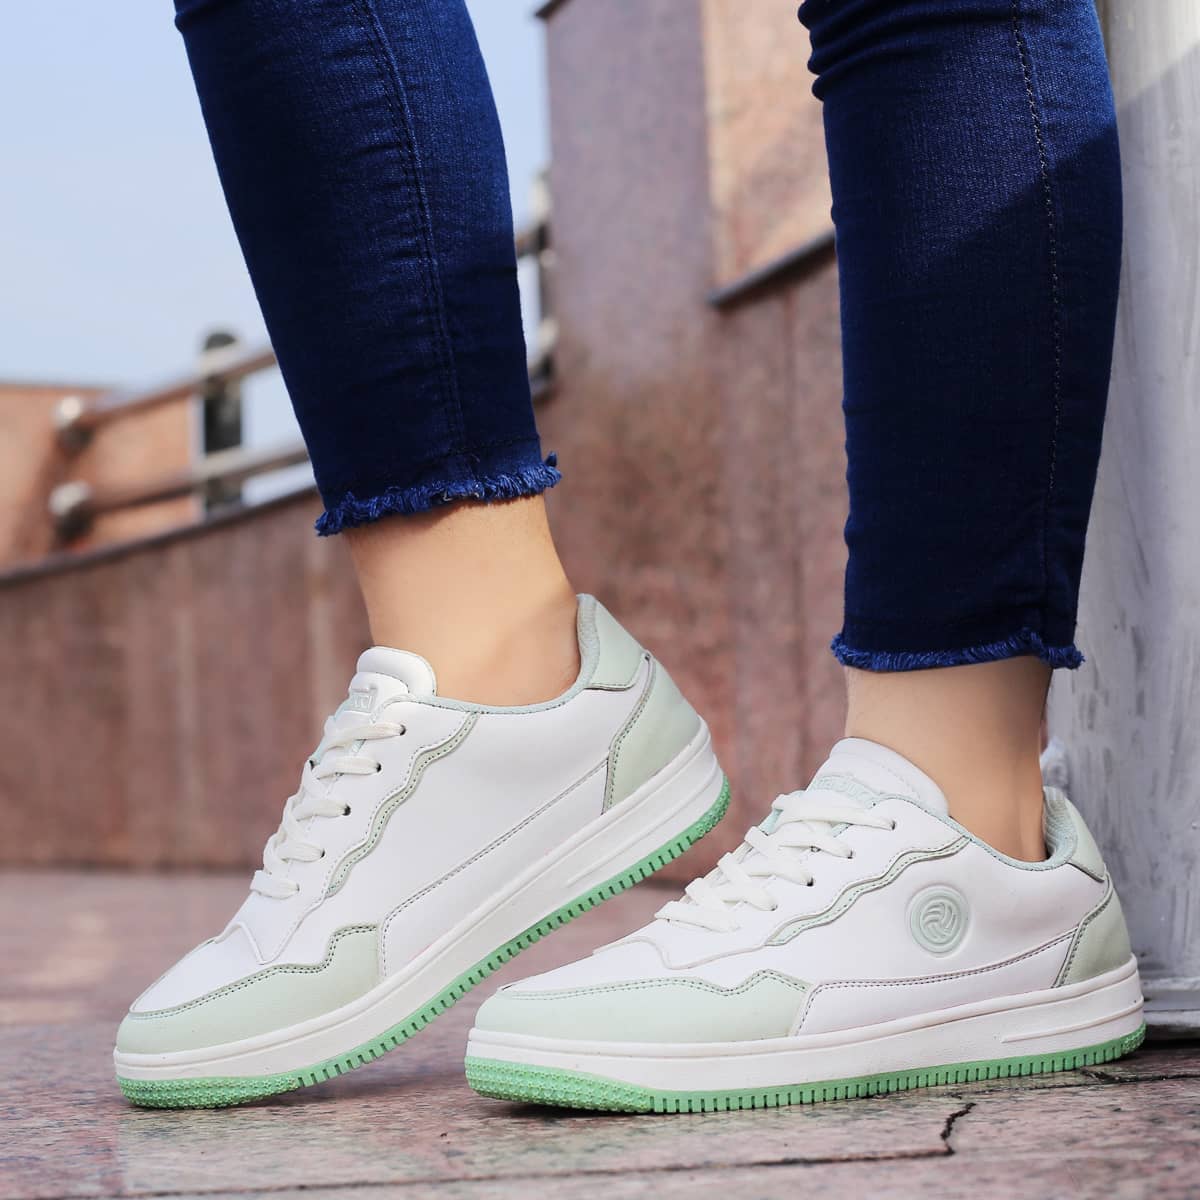 40 Best women's white sneakers trending now from designer to luxe for less